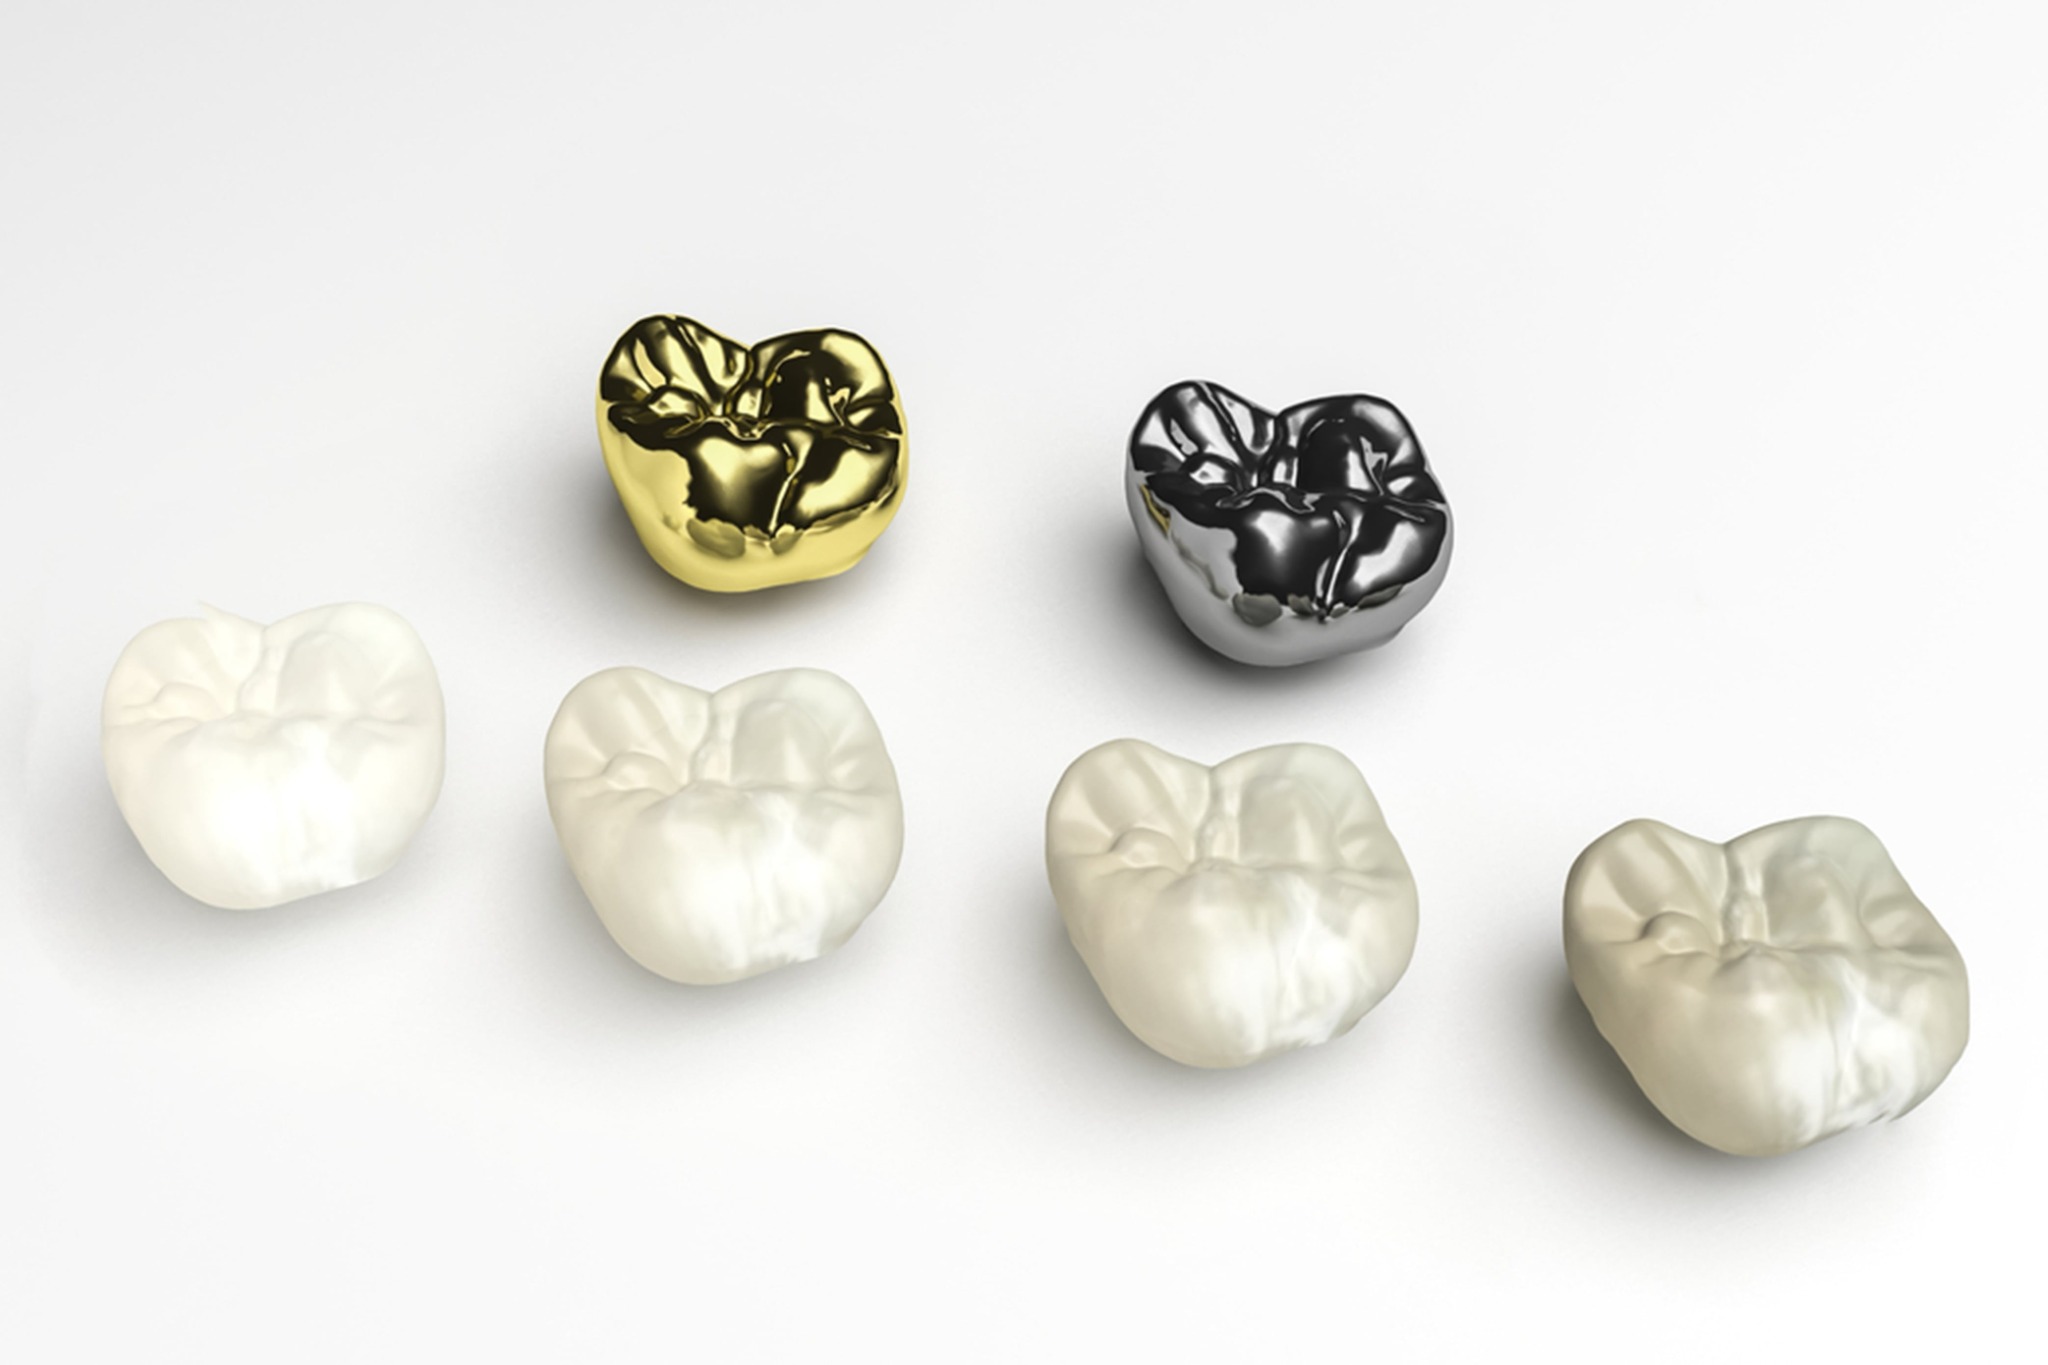 how to avoid dental crowns if you do not really need them